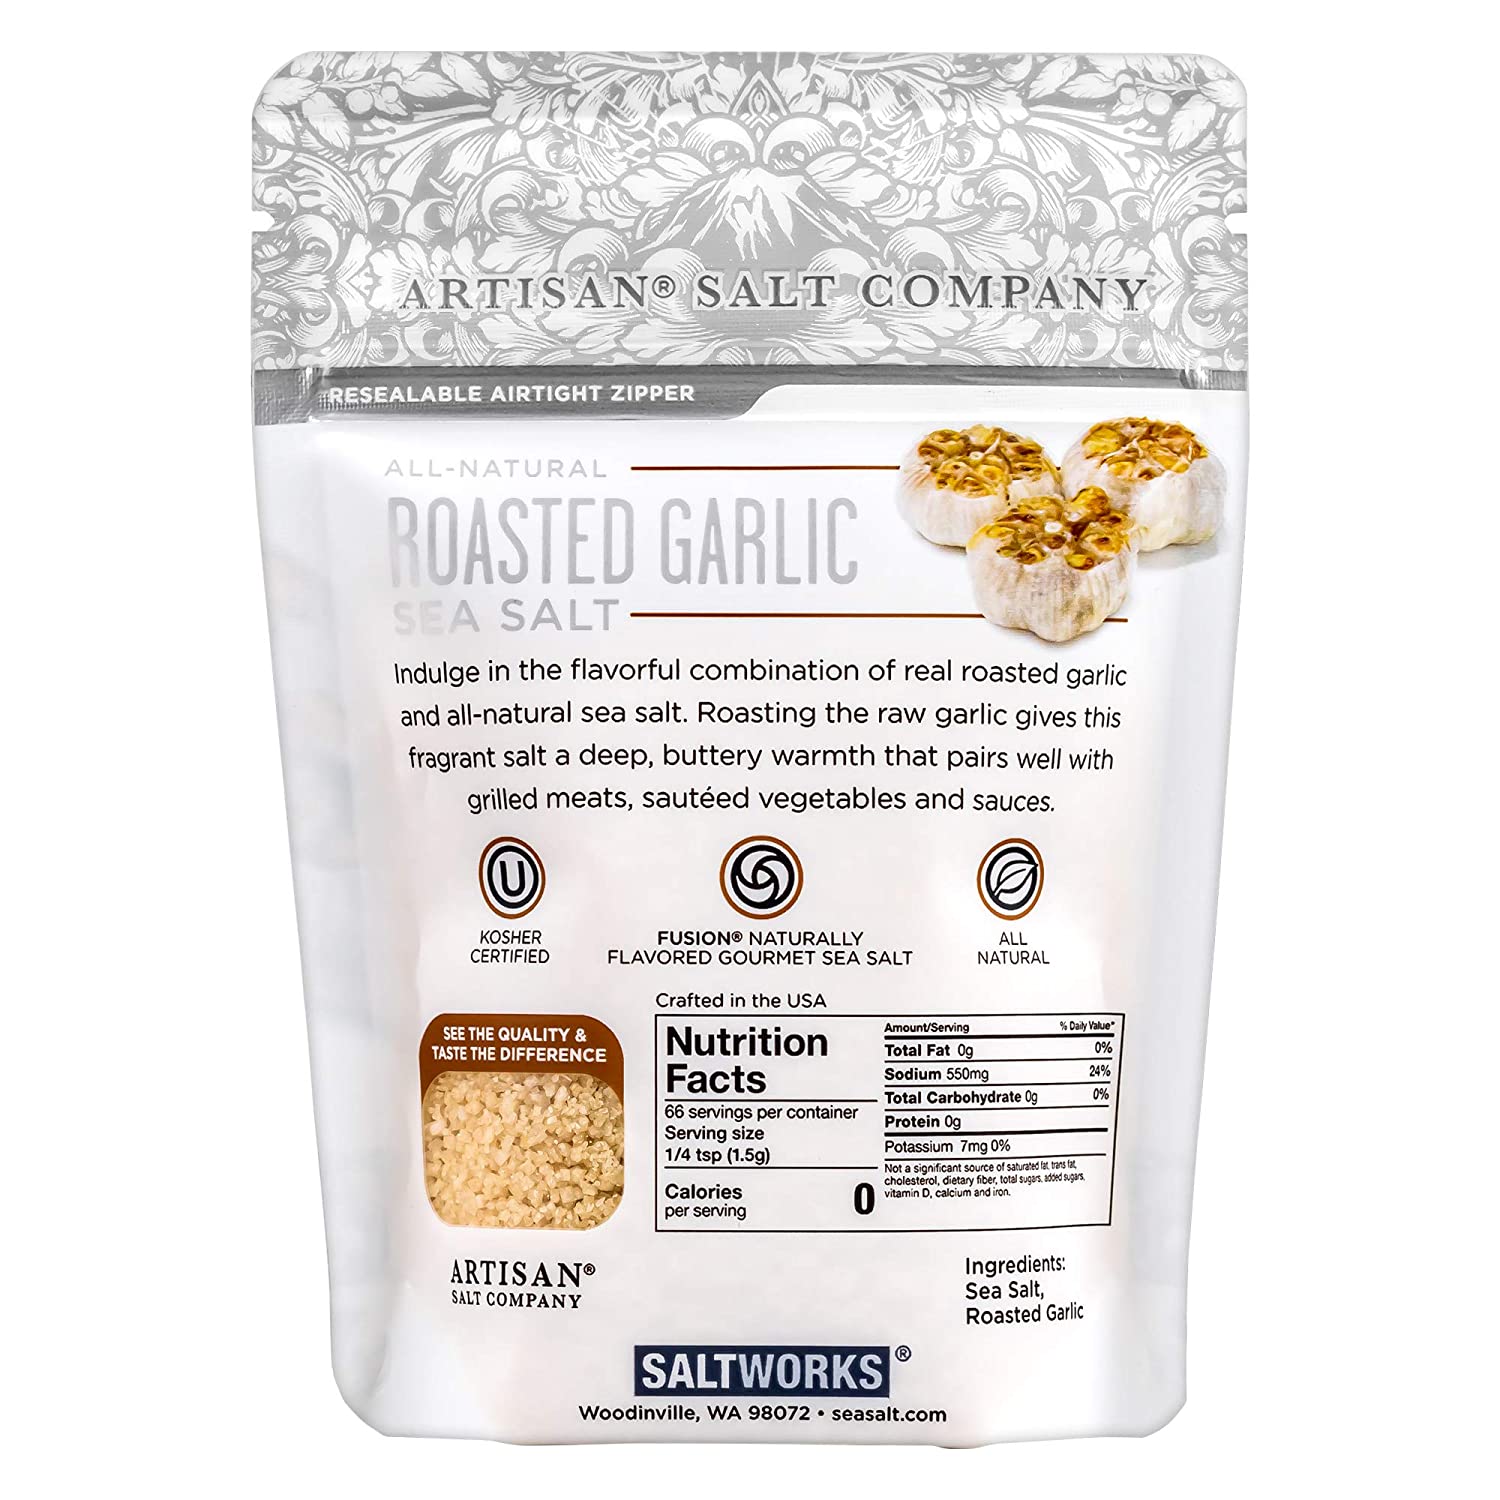 Roasted Garlic flavored Sea Salt, distributed by Alpha Omega Imports, Inc